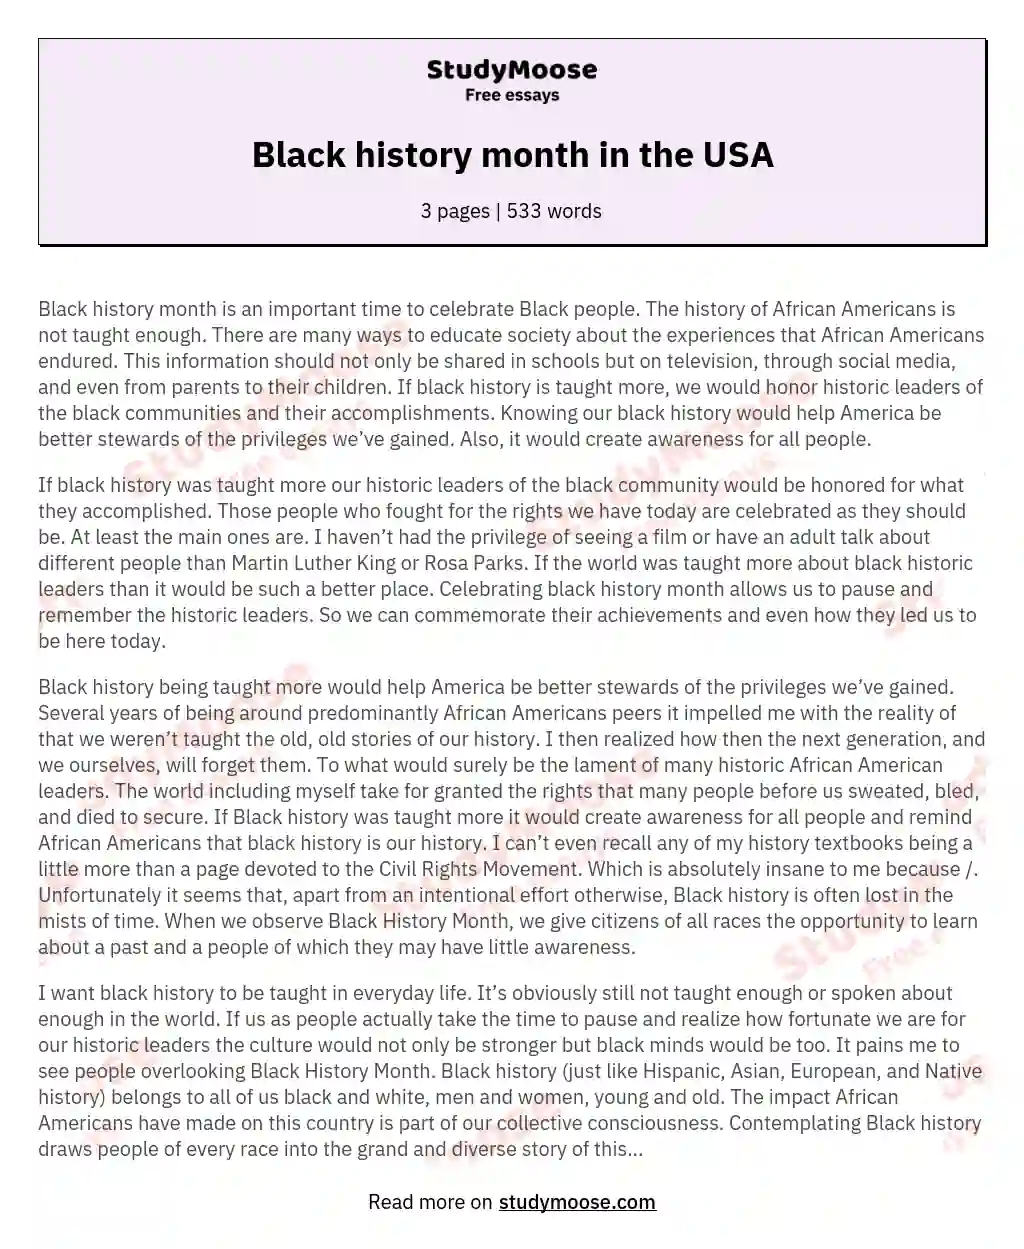 Black history month in the USA essay